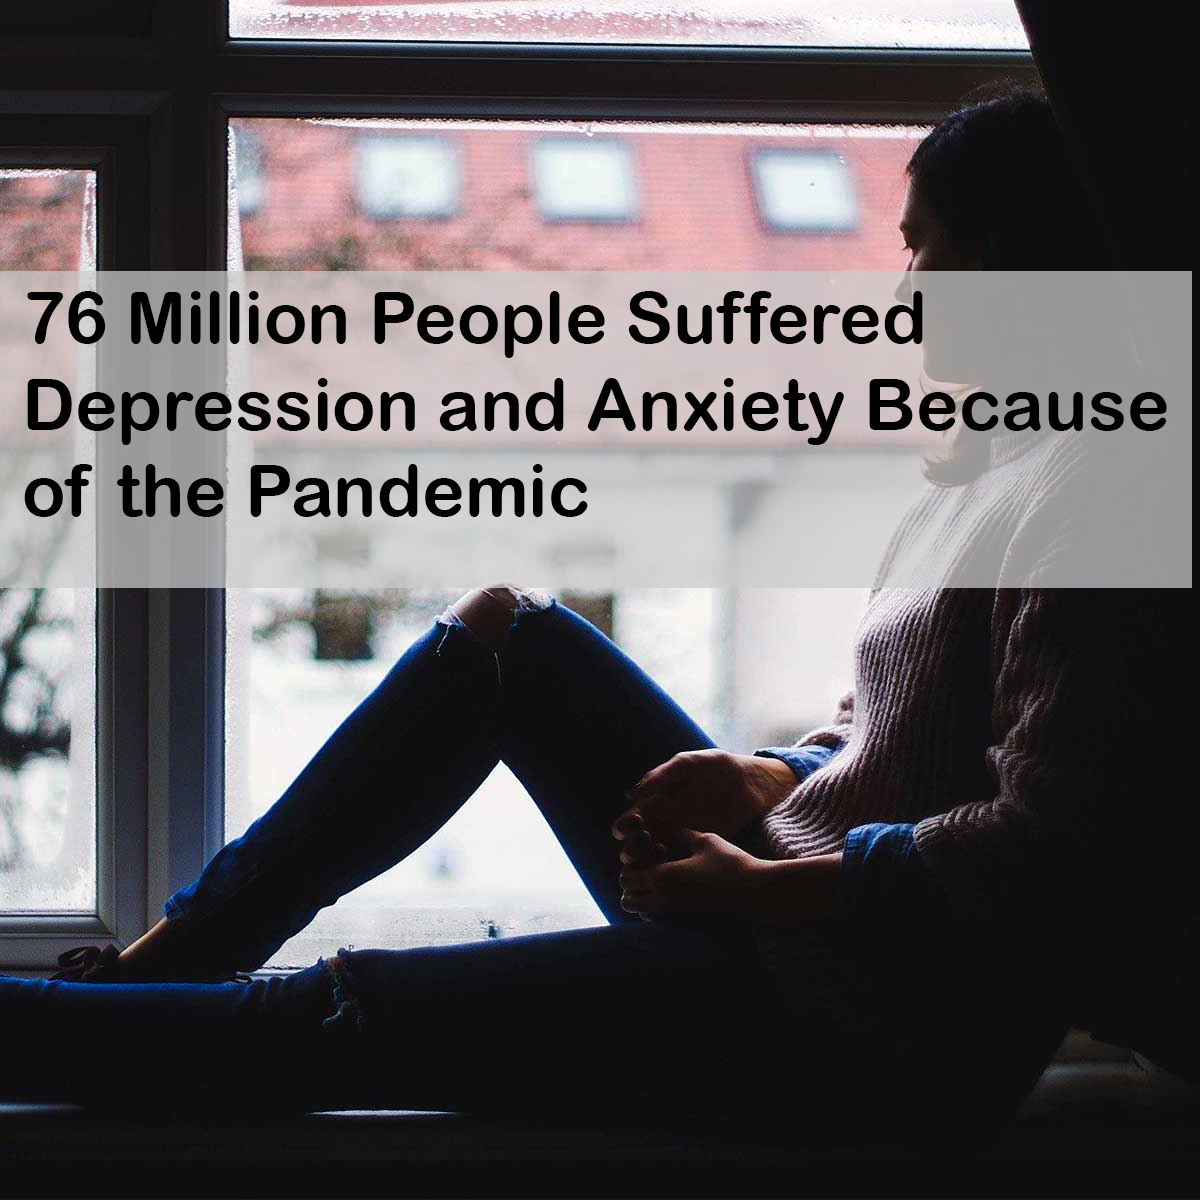 76 Million People Suffered Depression and Anxiety Because of the Pandemic